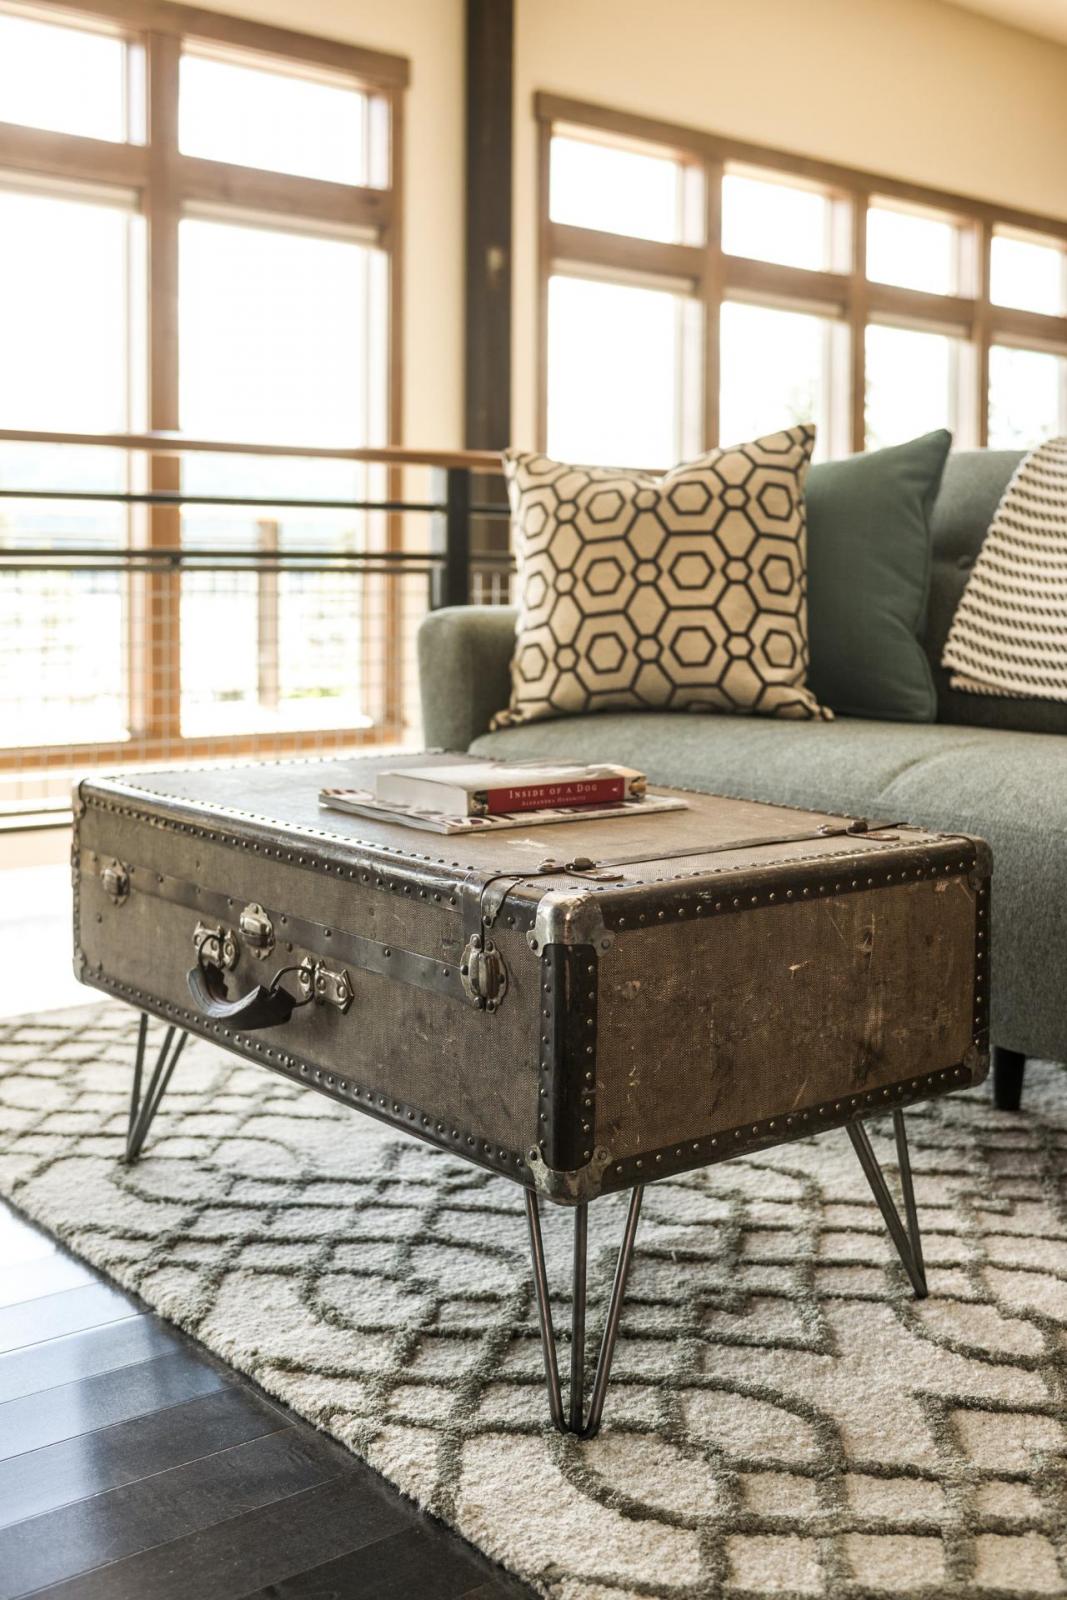 An upcycled suitcase coffee table in a living room.